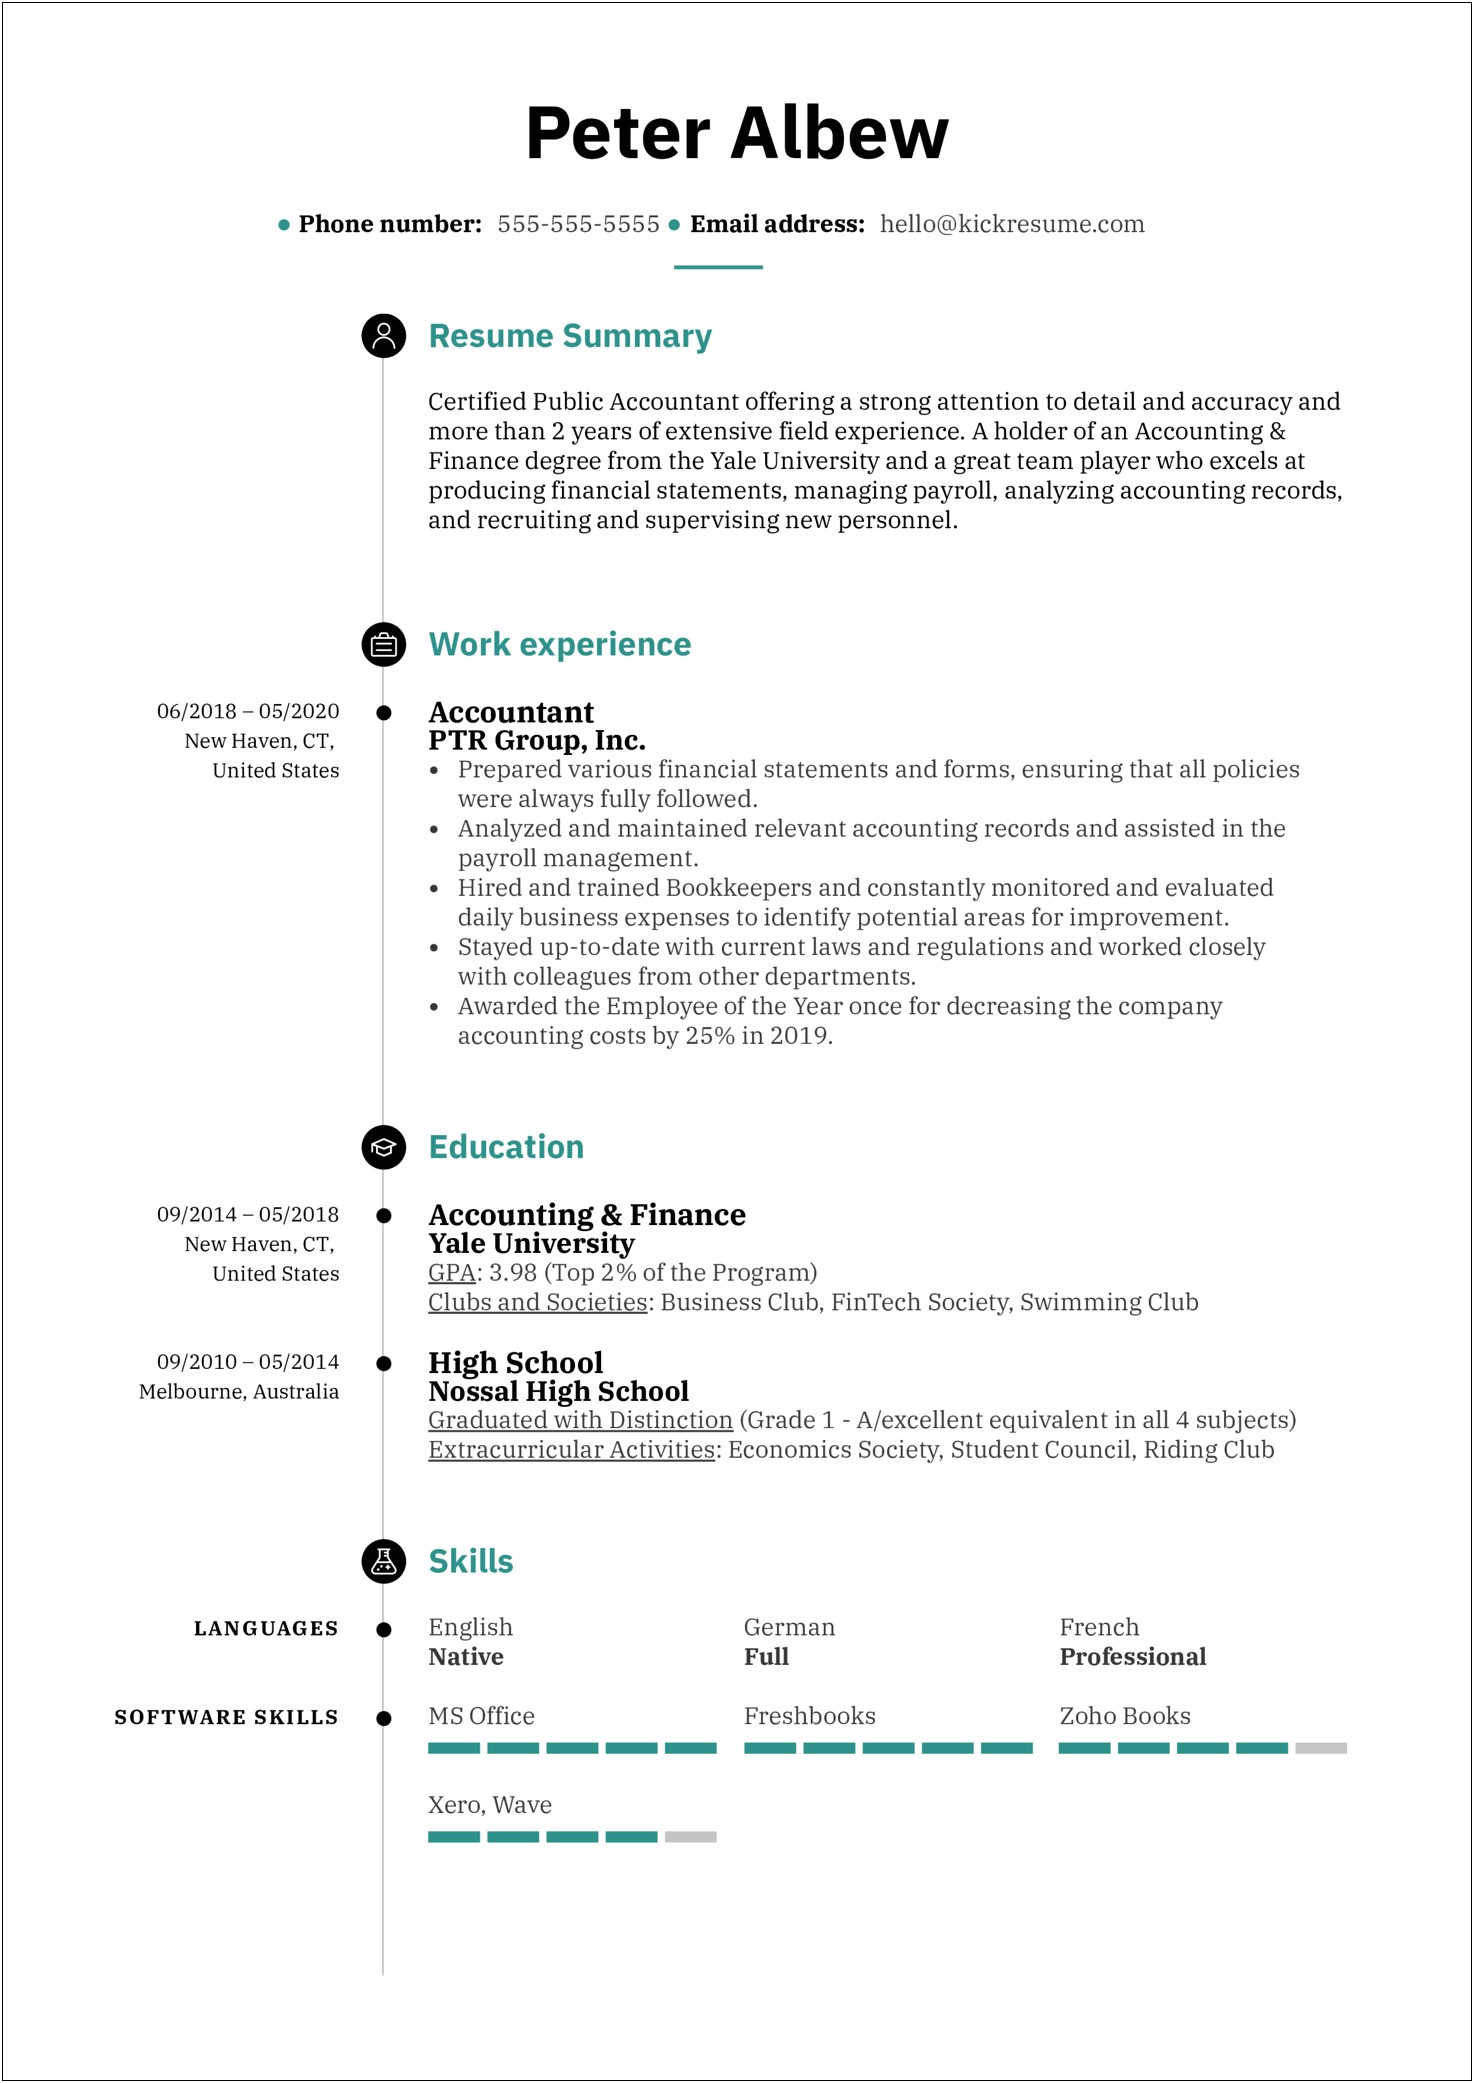 Resume Profile Samples Top Producer